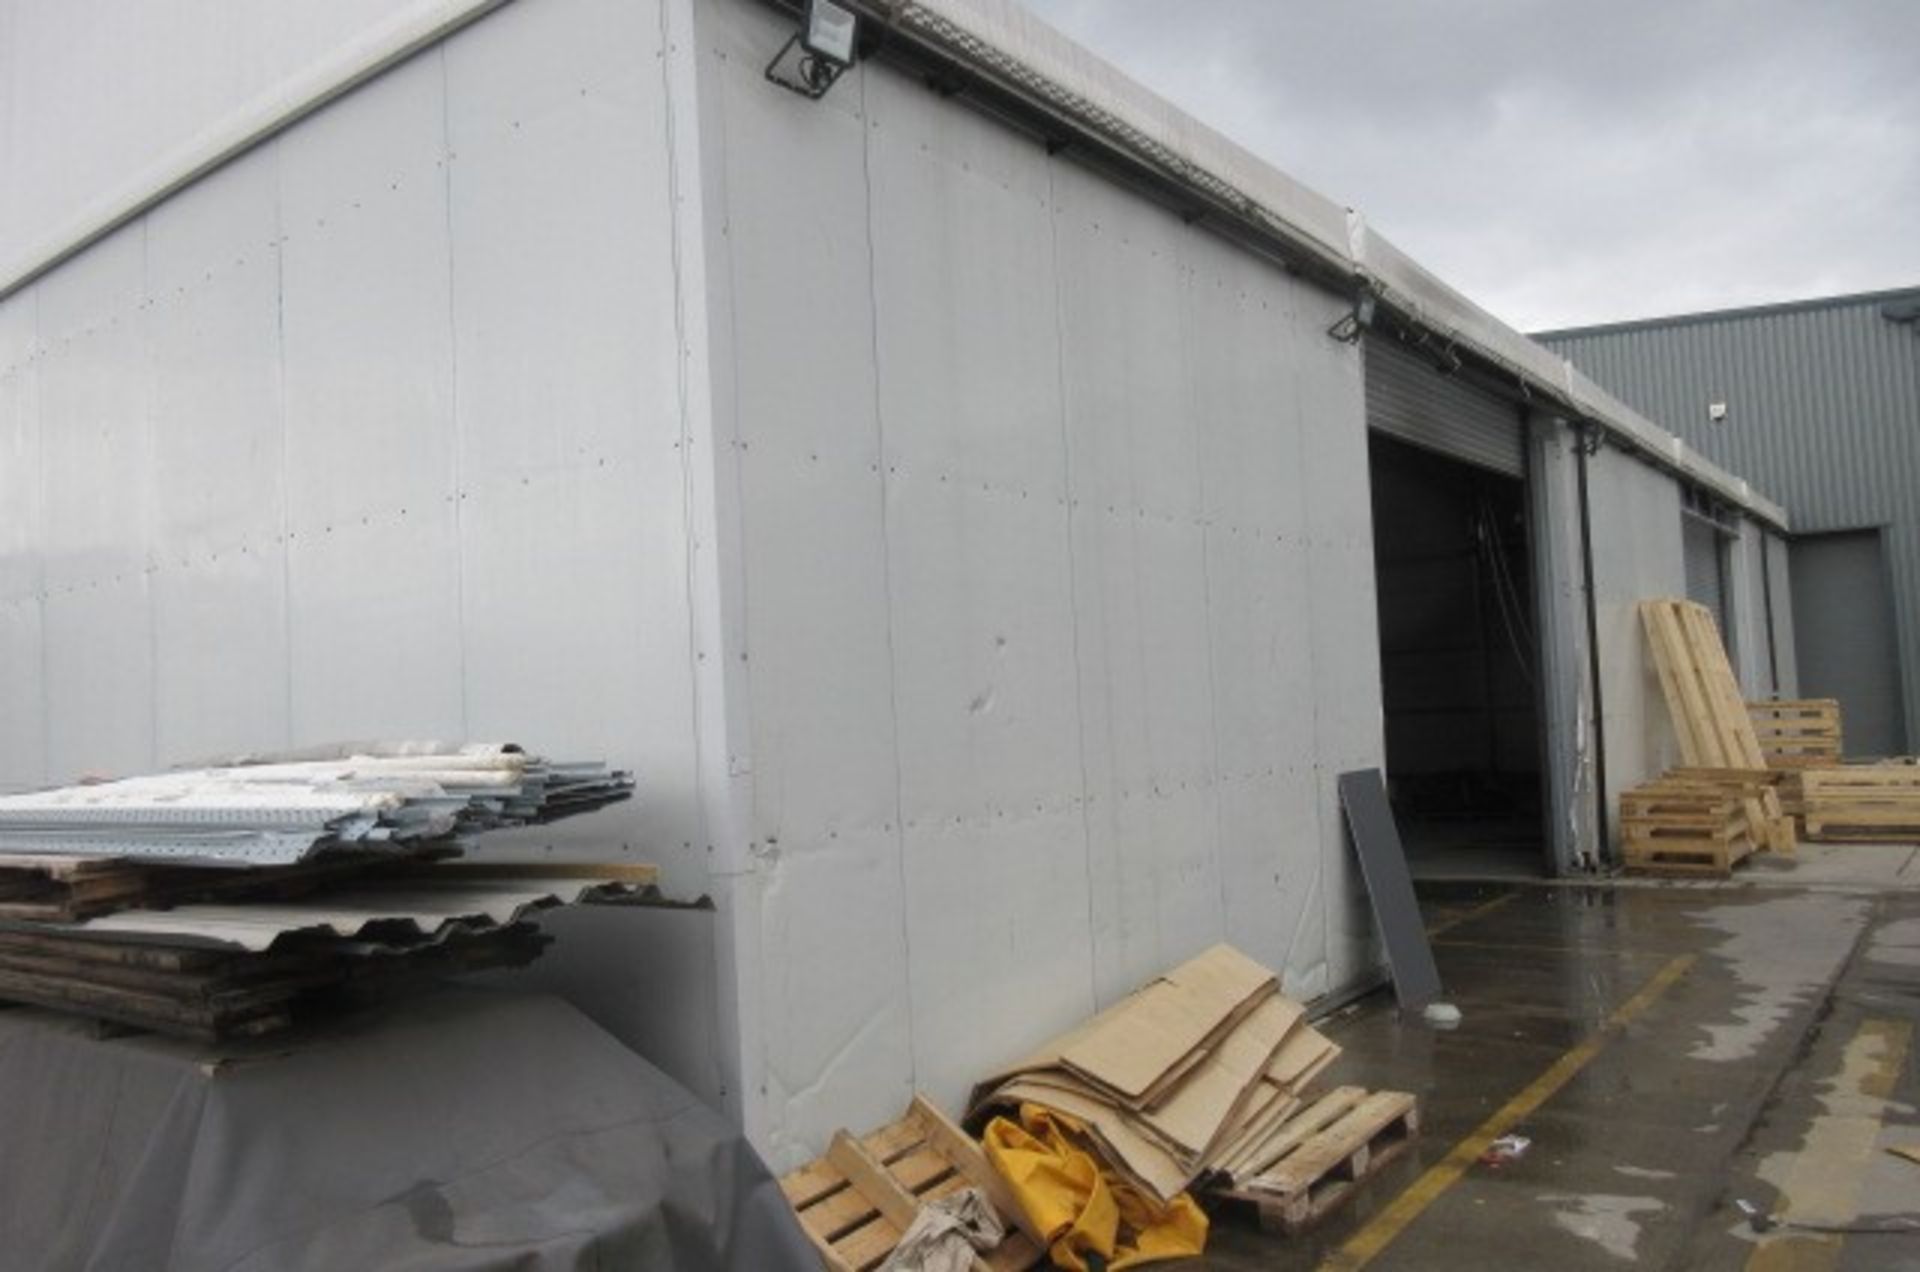 Alloy portal frame temporary building - Image 4 of 11